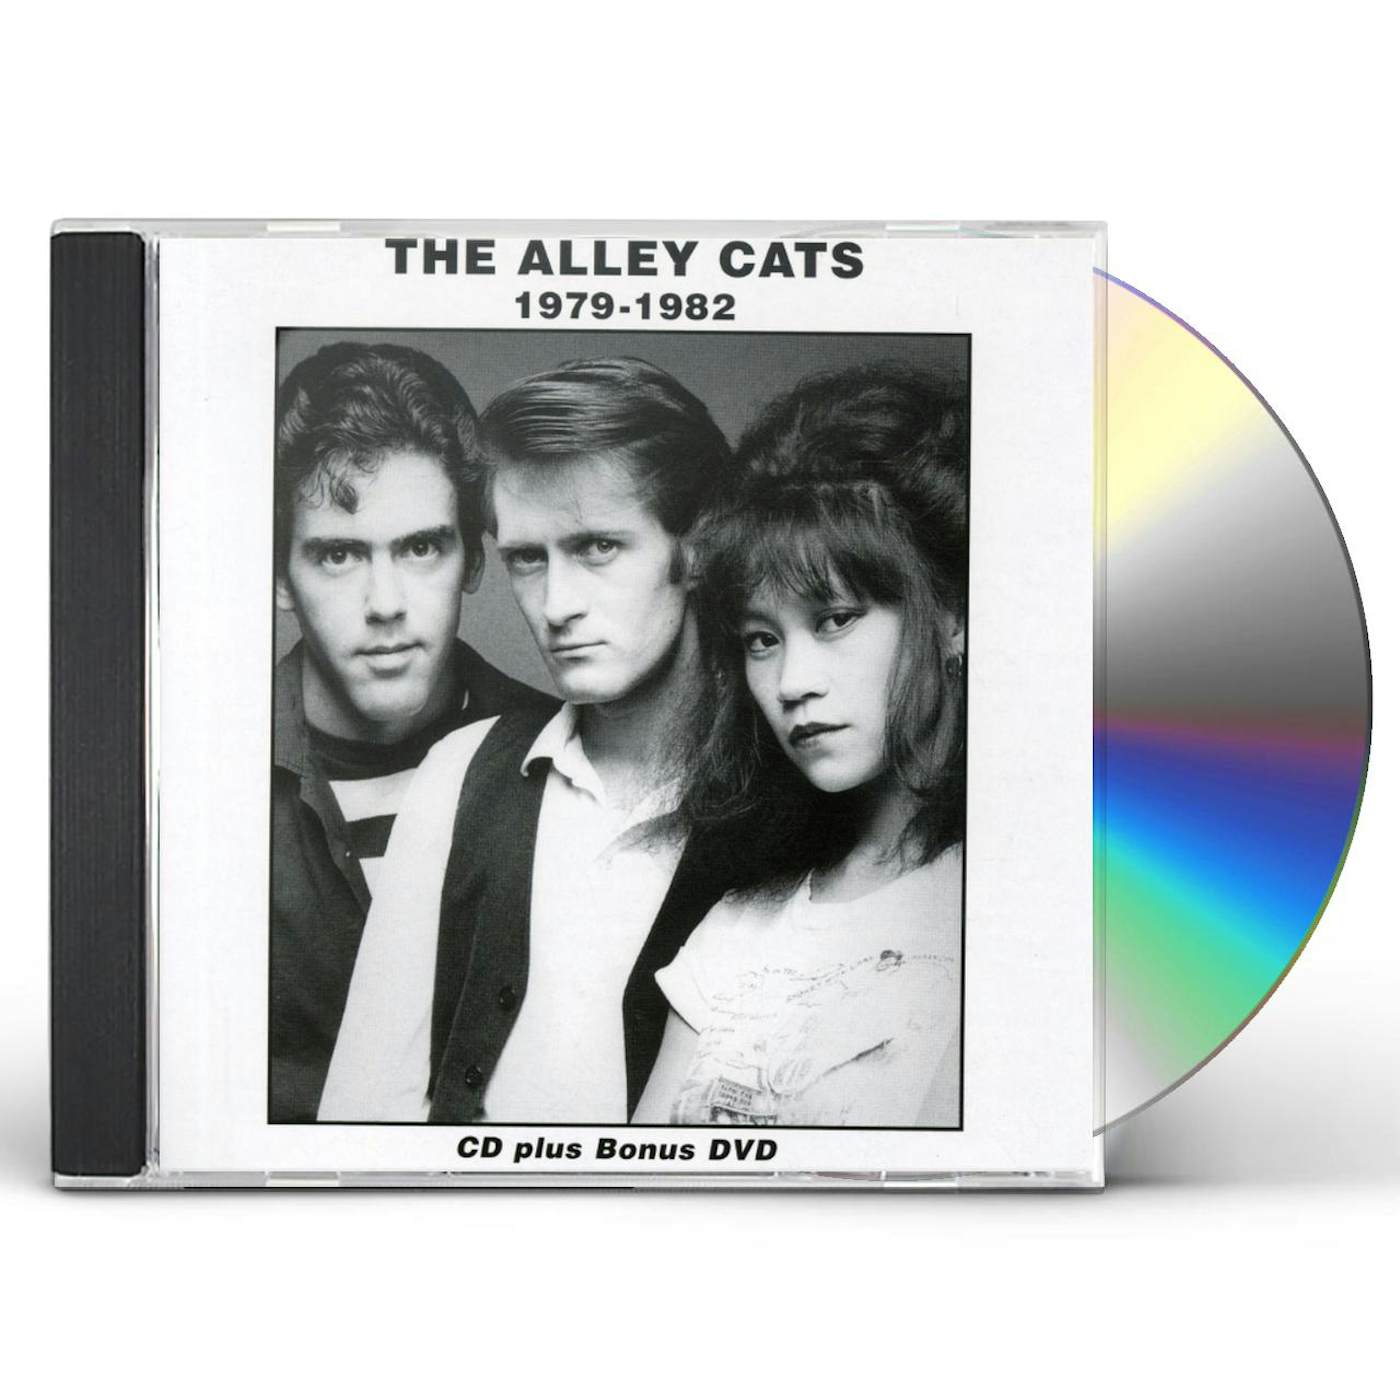 The Alley Cats 1979-1982 CD